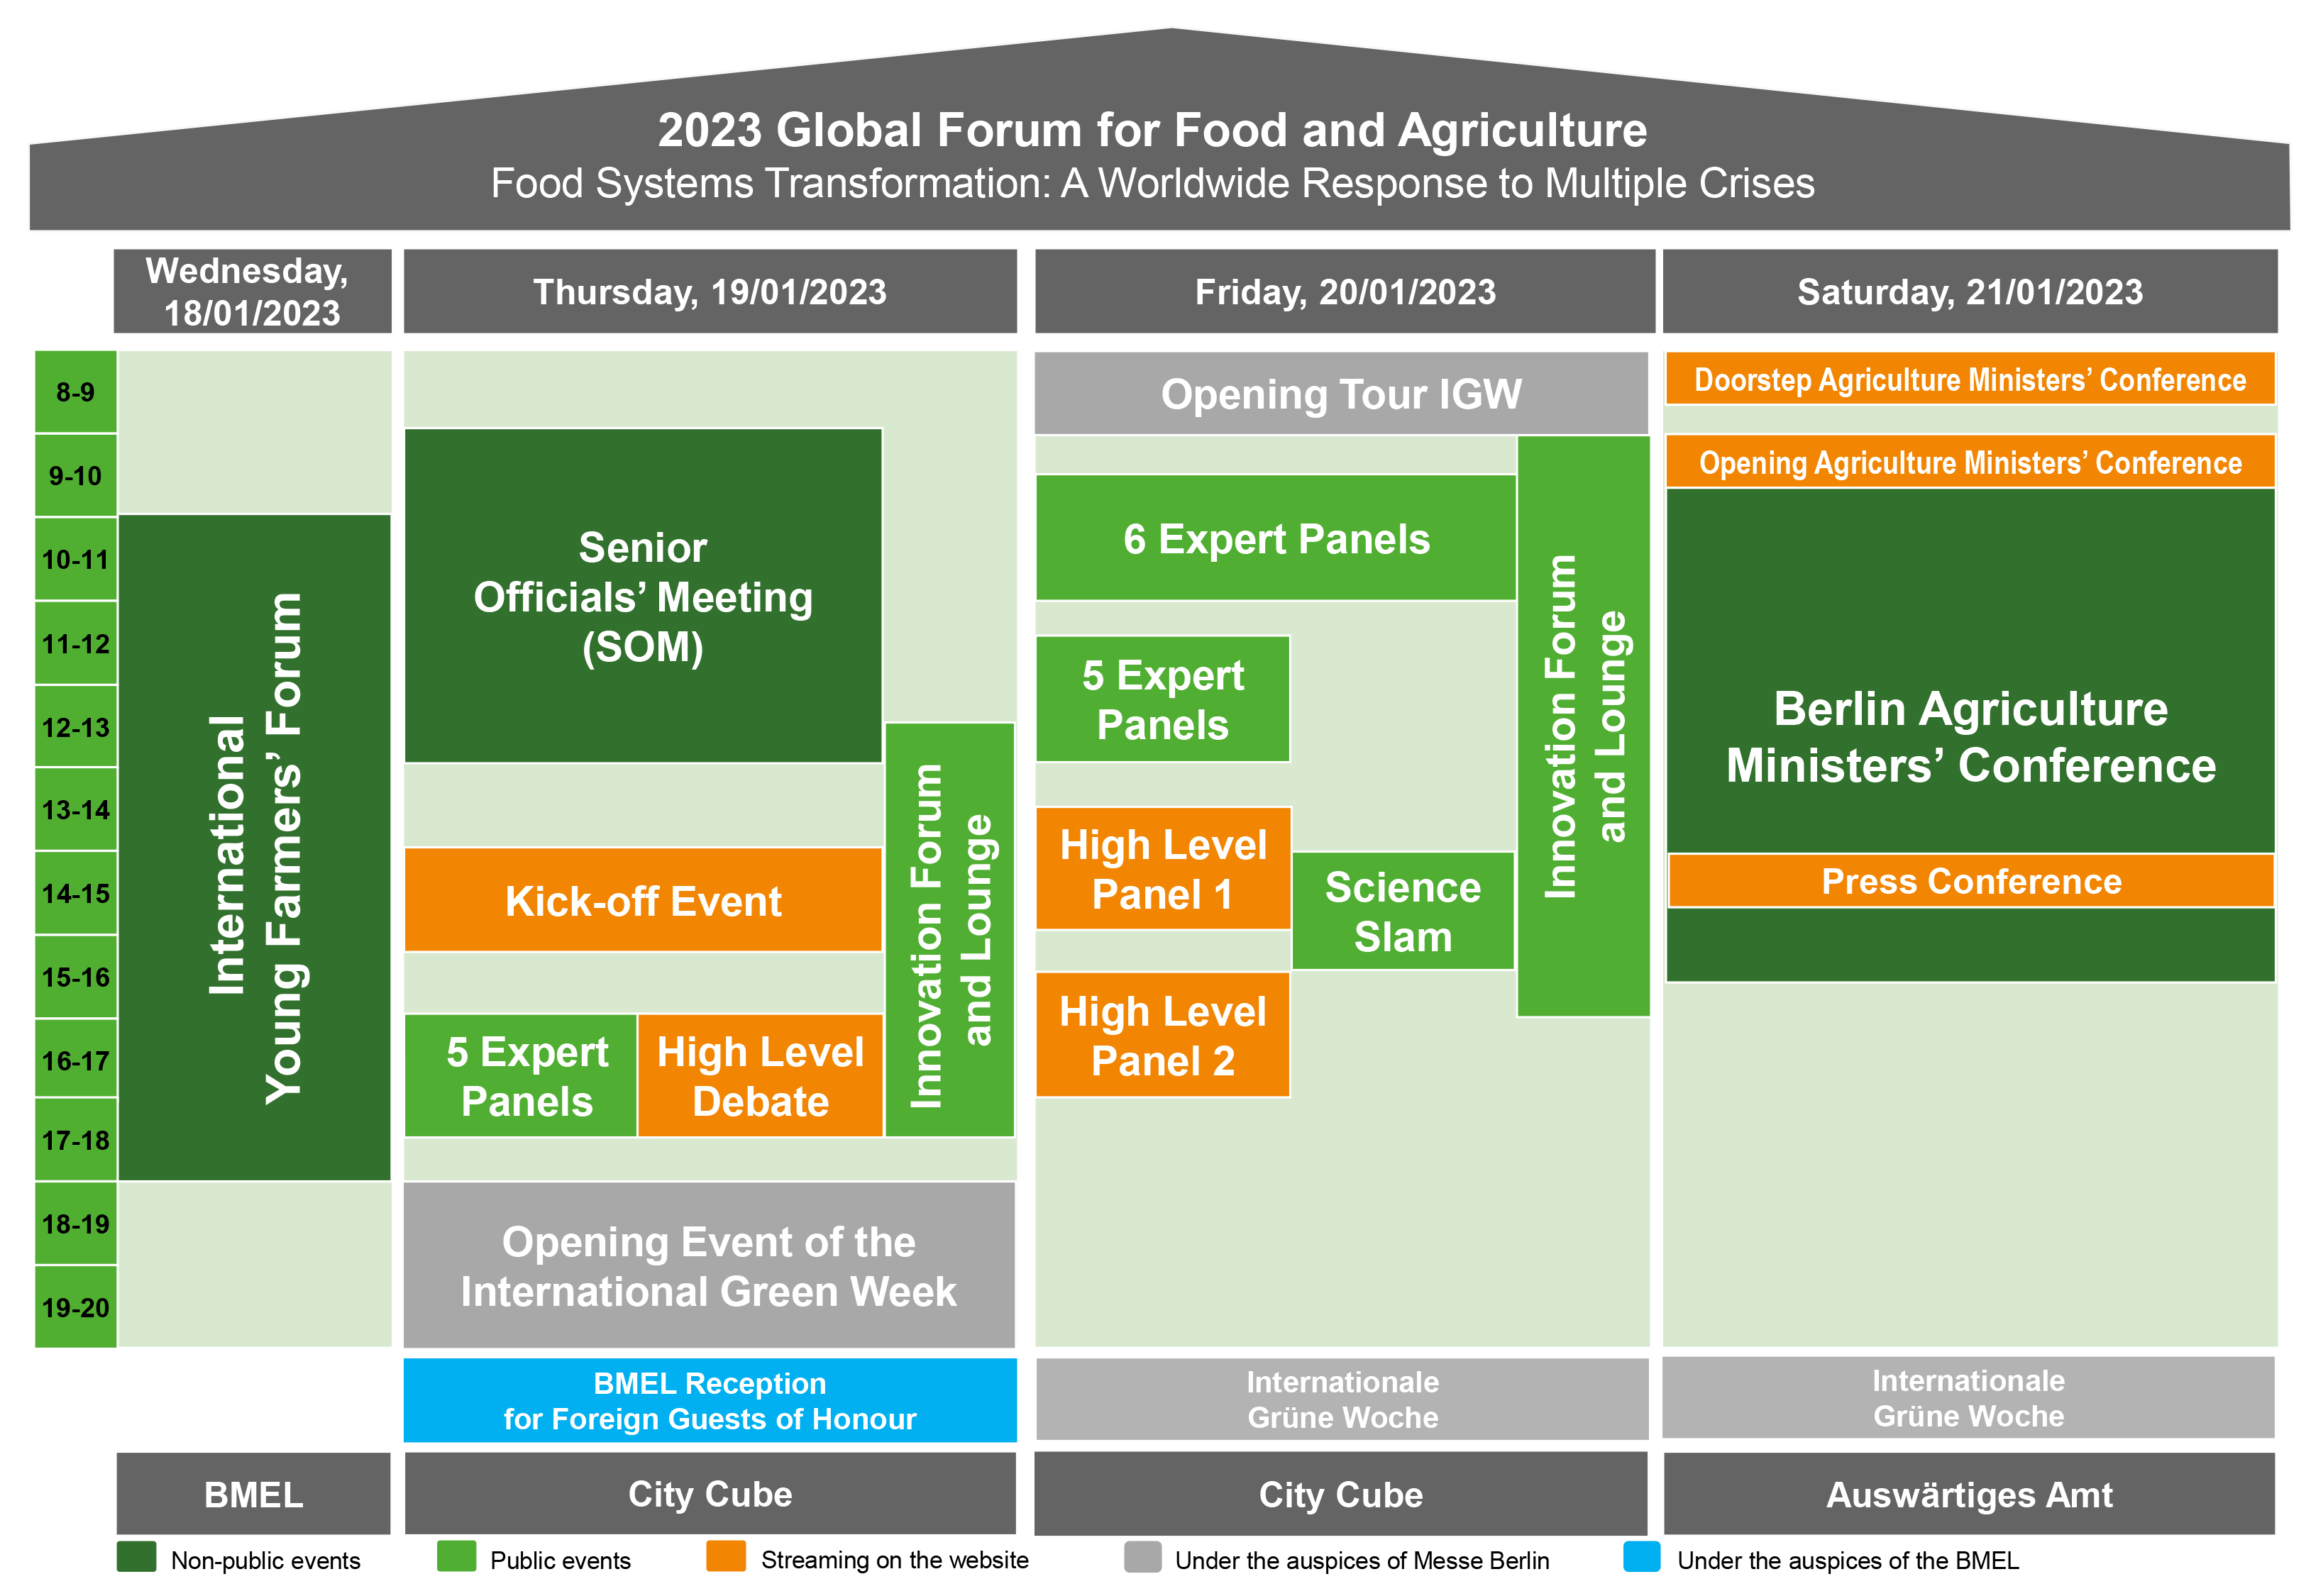 Global Forum for Food and Agriculture 2023